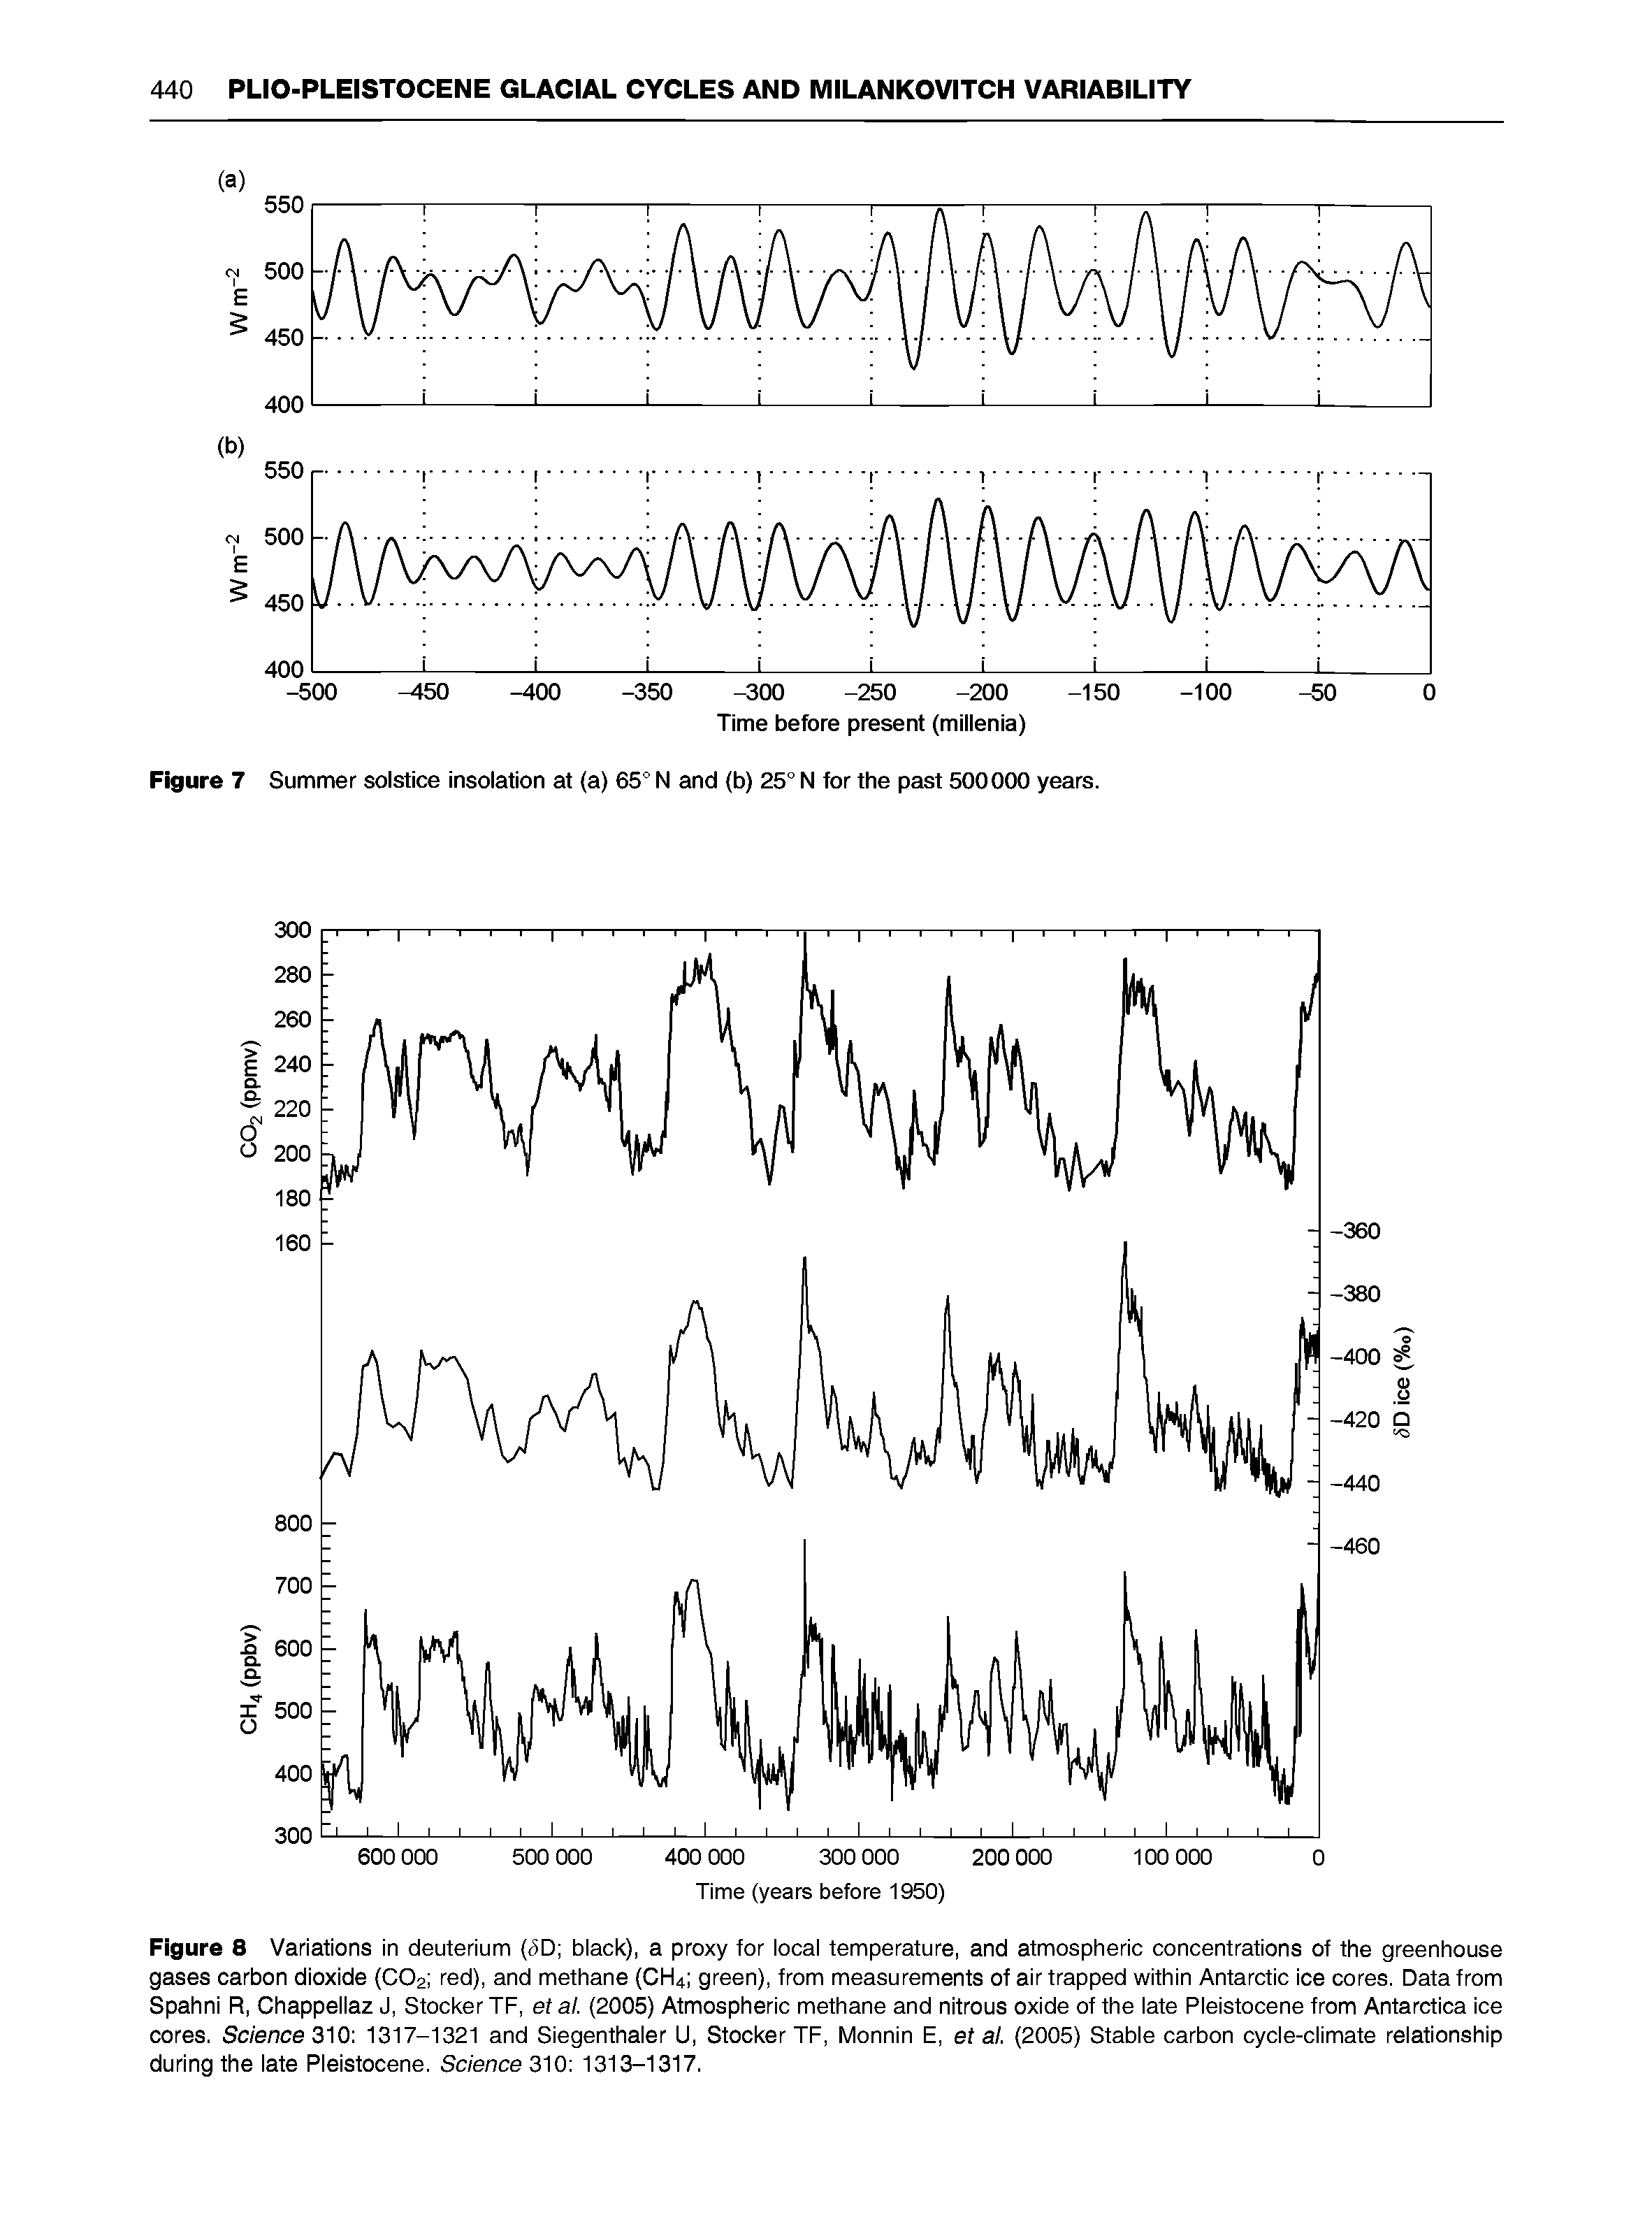 Figure 8 Variations in deuterium <5D black), a proxy for local temperature, and atmospheric concentrations of the greenhouse gases carbon dioxide CO2 red), and methane CH4 green), from measurements of air trapped within Antarctic ice cores. Data from Spahni R, Chappeliaz J, Stocker TF, et al. (2005) Atmospheric methane and nitrous oxide of the late Pleistocene from Antarctica ice cores. Science 3 0 . 1317-1321 and Siegenthaler U, Stocker TF, Monnin E, et al. (2005) Stable carbon cycle-climate relationship during the late Pleistocene. Science 310 1313-1317.